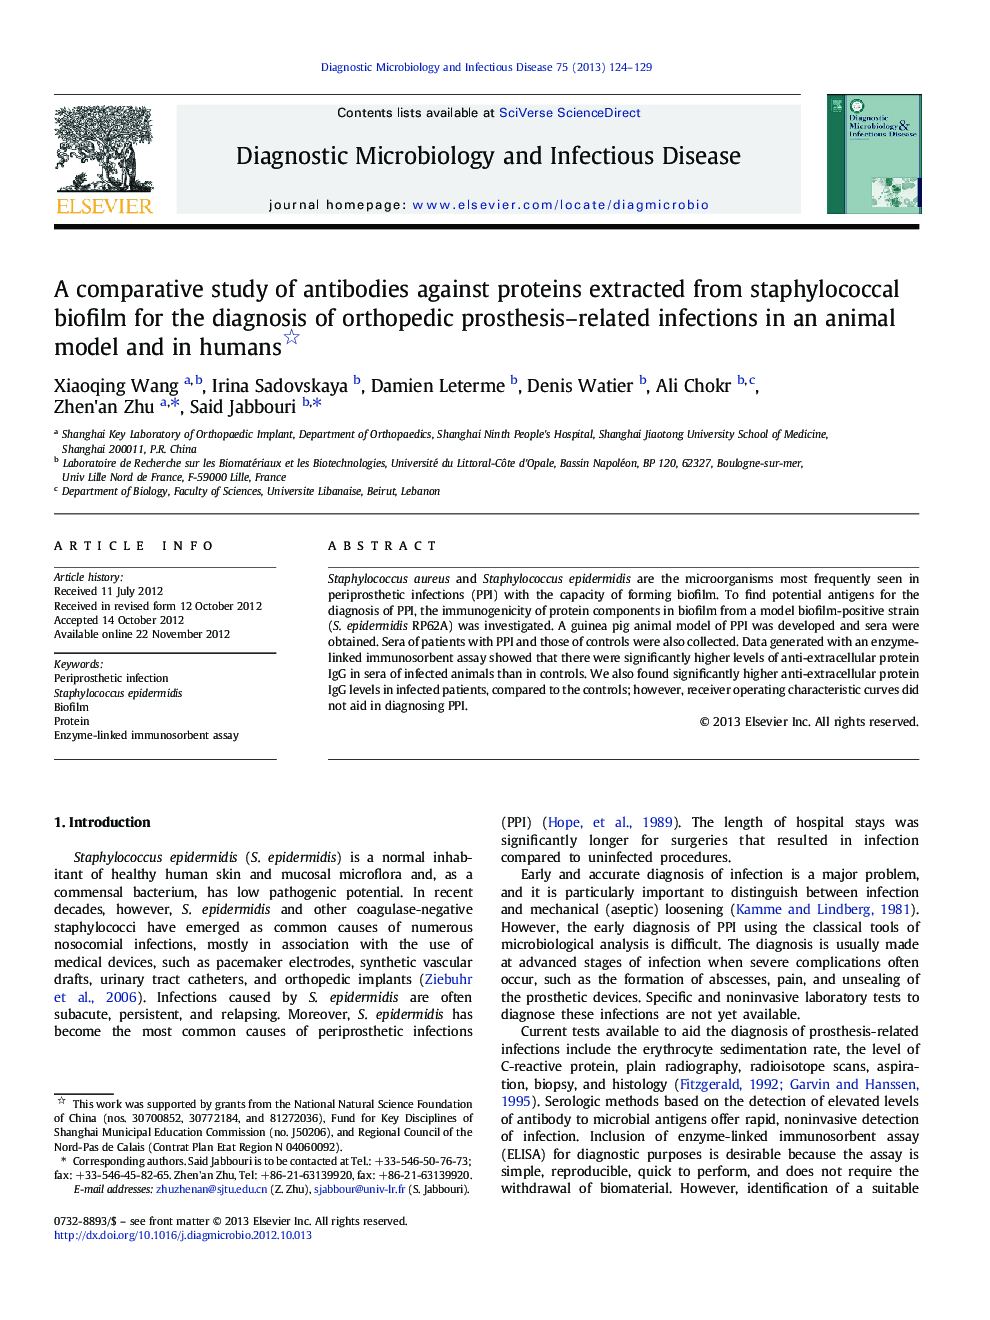 A comparative study of antibodies against proteins extracted from staphylococcal biofilm for the diagnosis of orthopedic prosthesis-related infections in an animal model and in humans